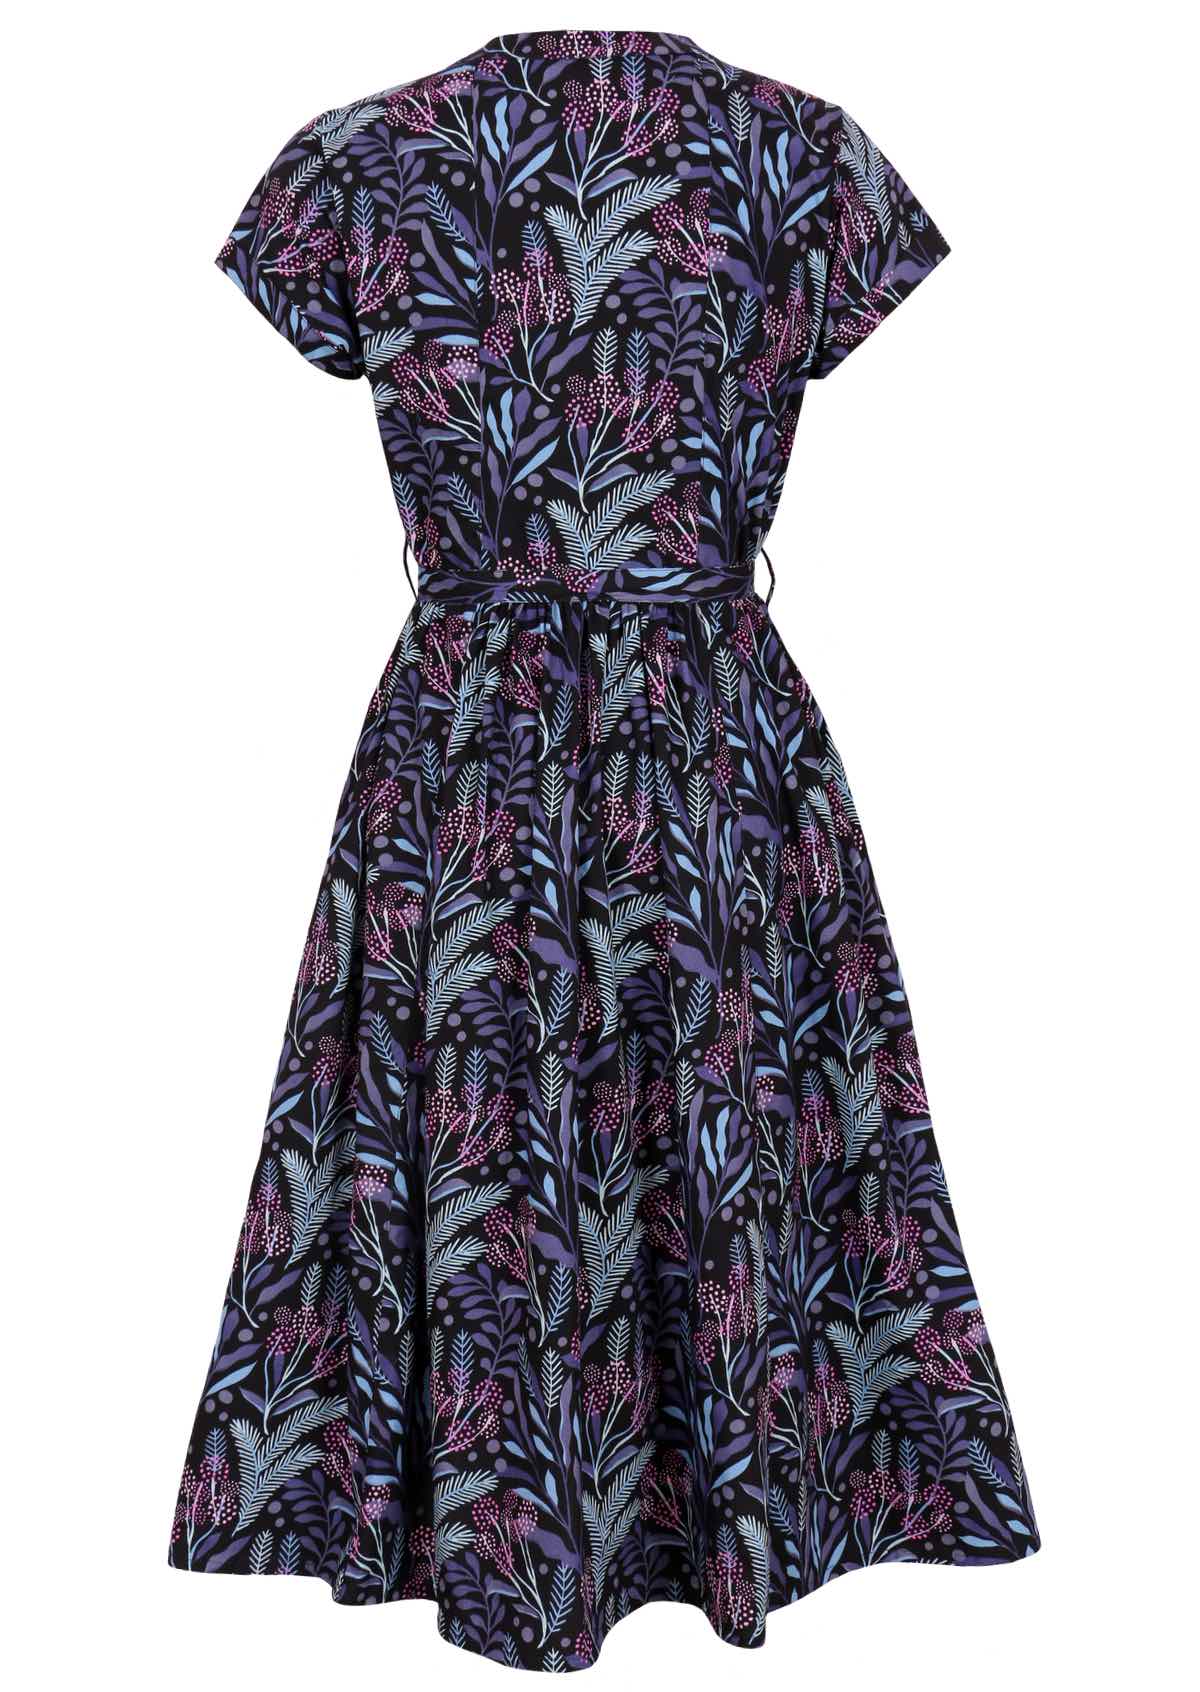 100% cotton retro dress with cap sleeves and waist tie